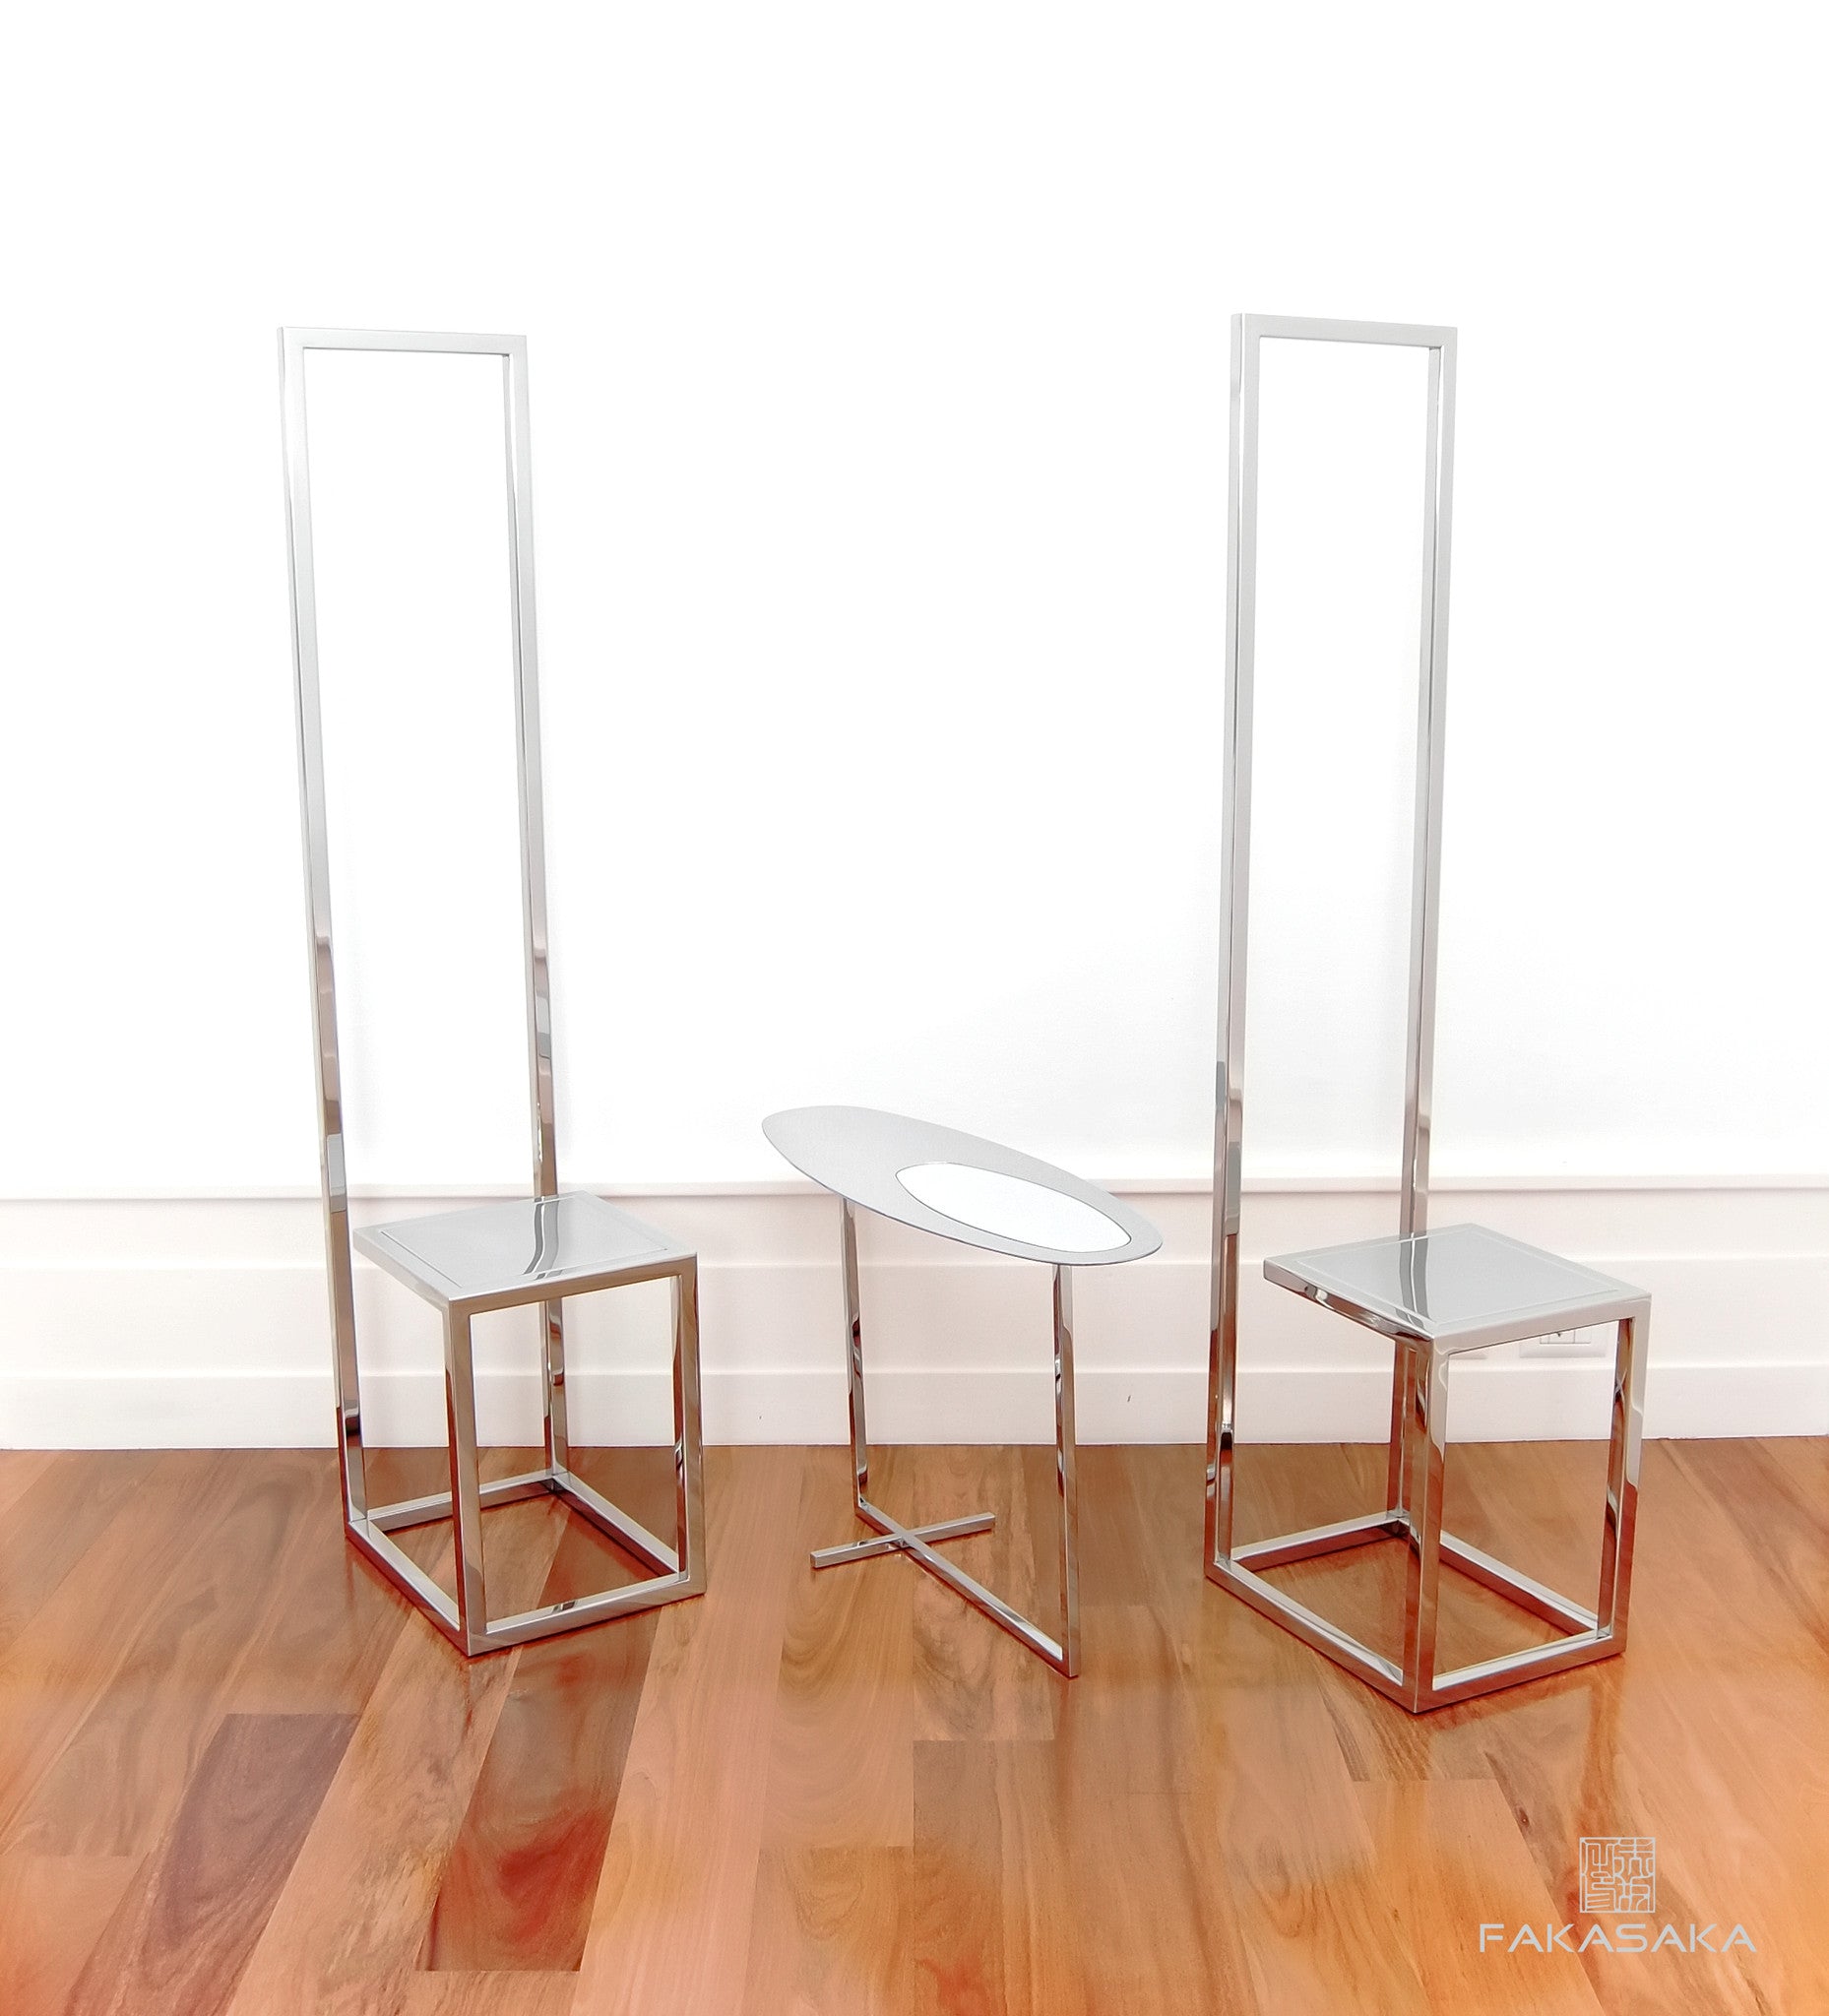 FA24 SIDE TABLE<br><br>MIRROR ON TOP<br>CHROMED